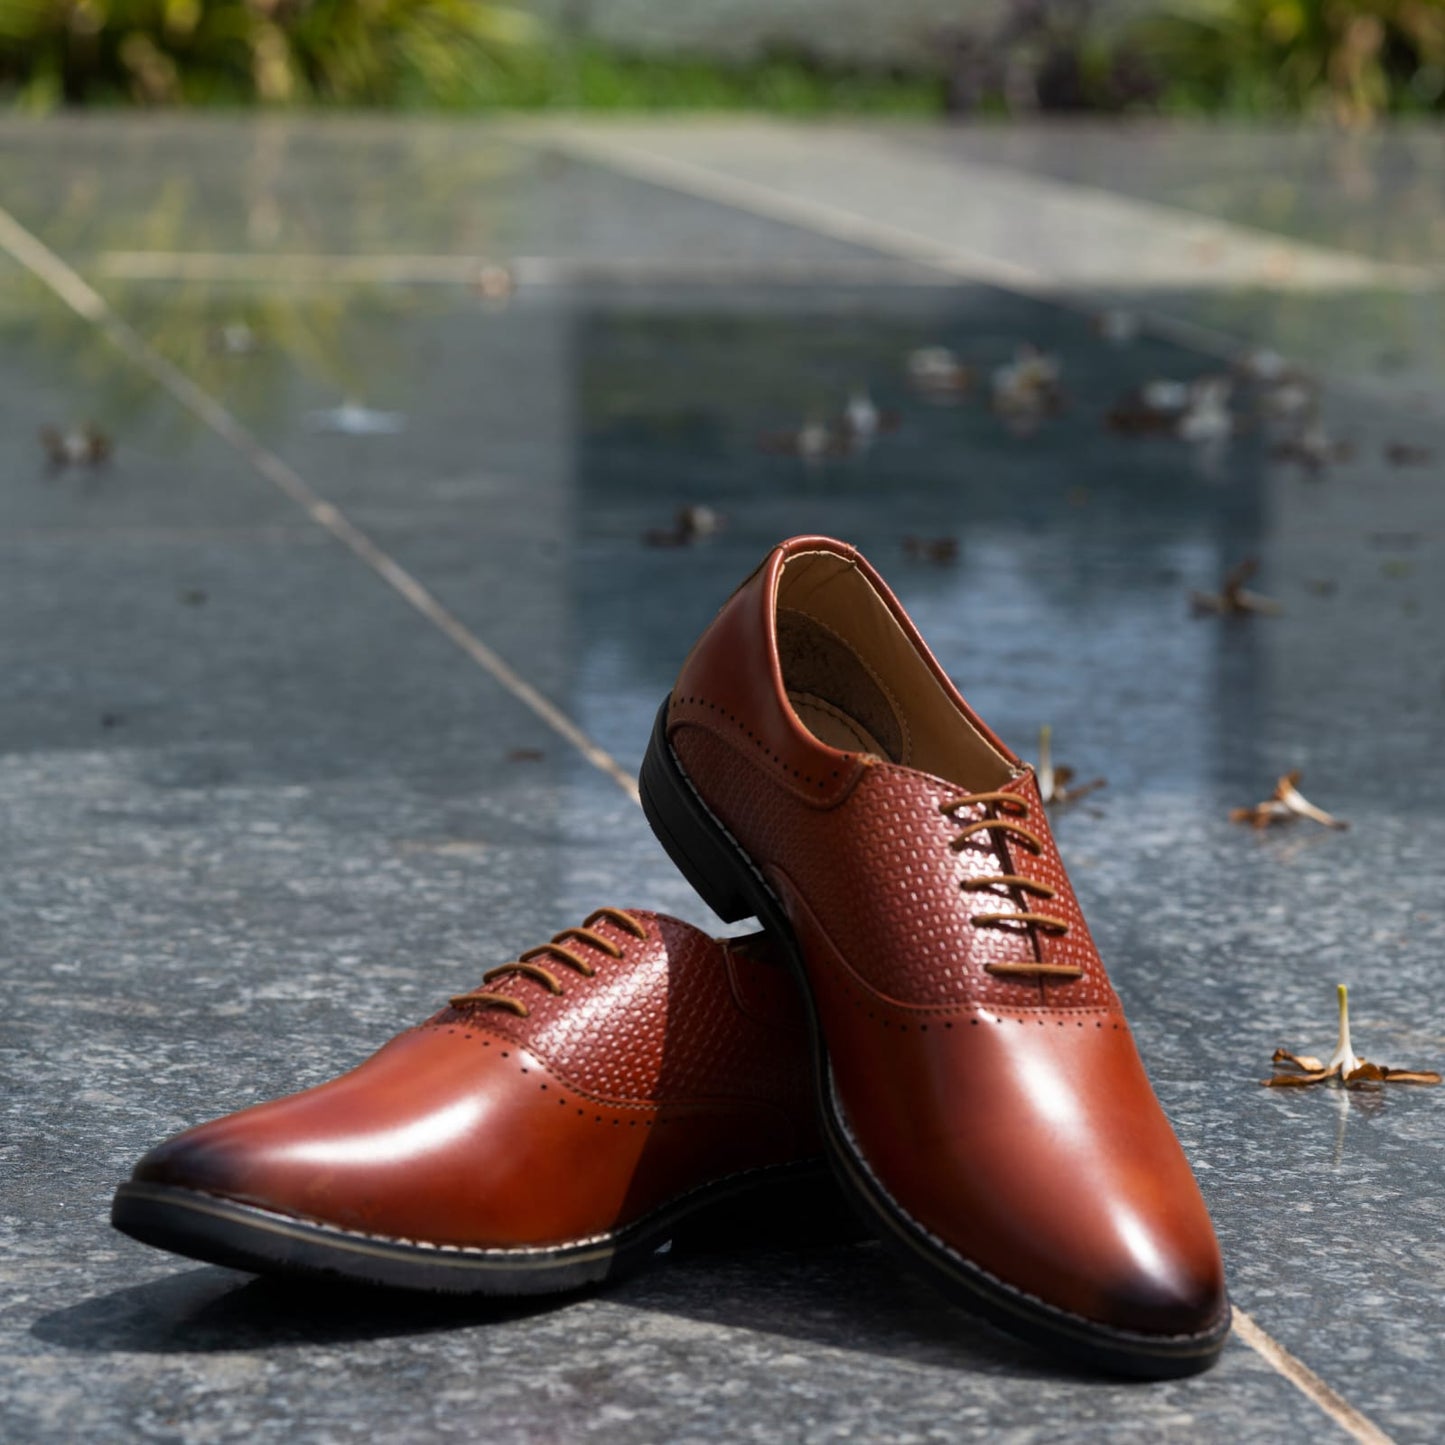 The Aurous Montana Laceup Formal Oxford Shoes - Tan